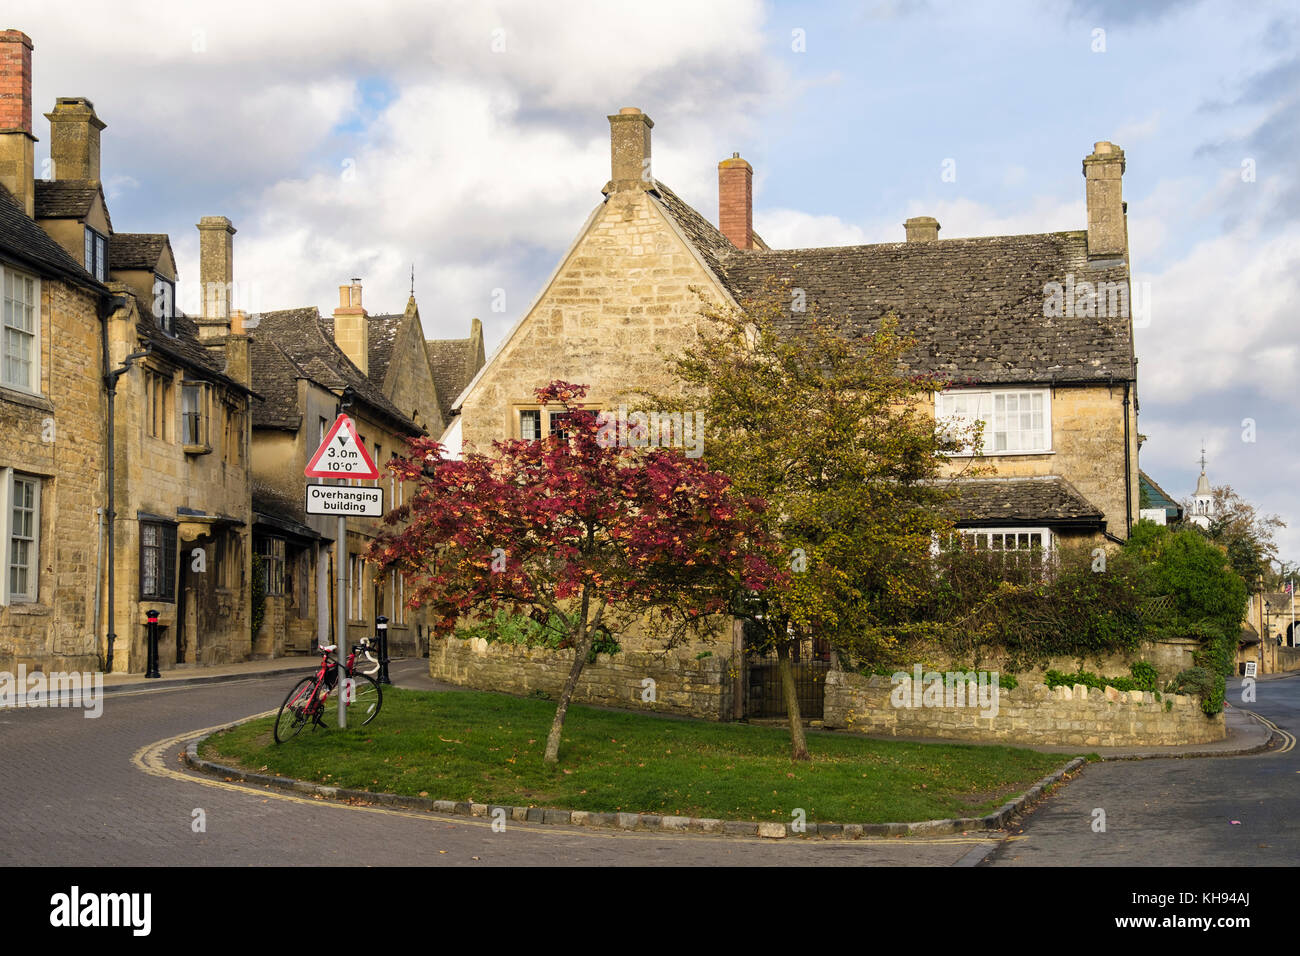 Old Cotswold stone buildings and unusual warning sign on narrow street in historic village. Chipping Campden, Cotswolds, Gloucestershire, England, UK Stock Photo